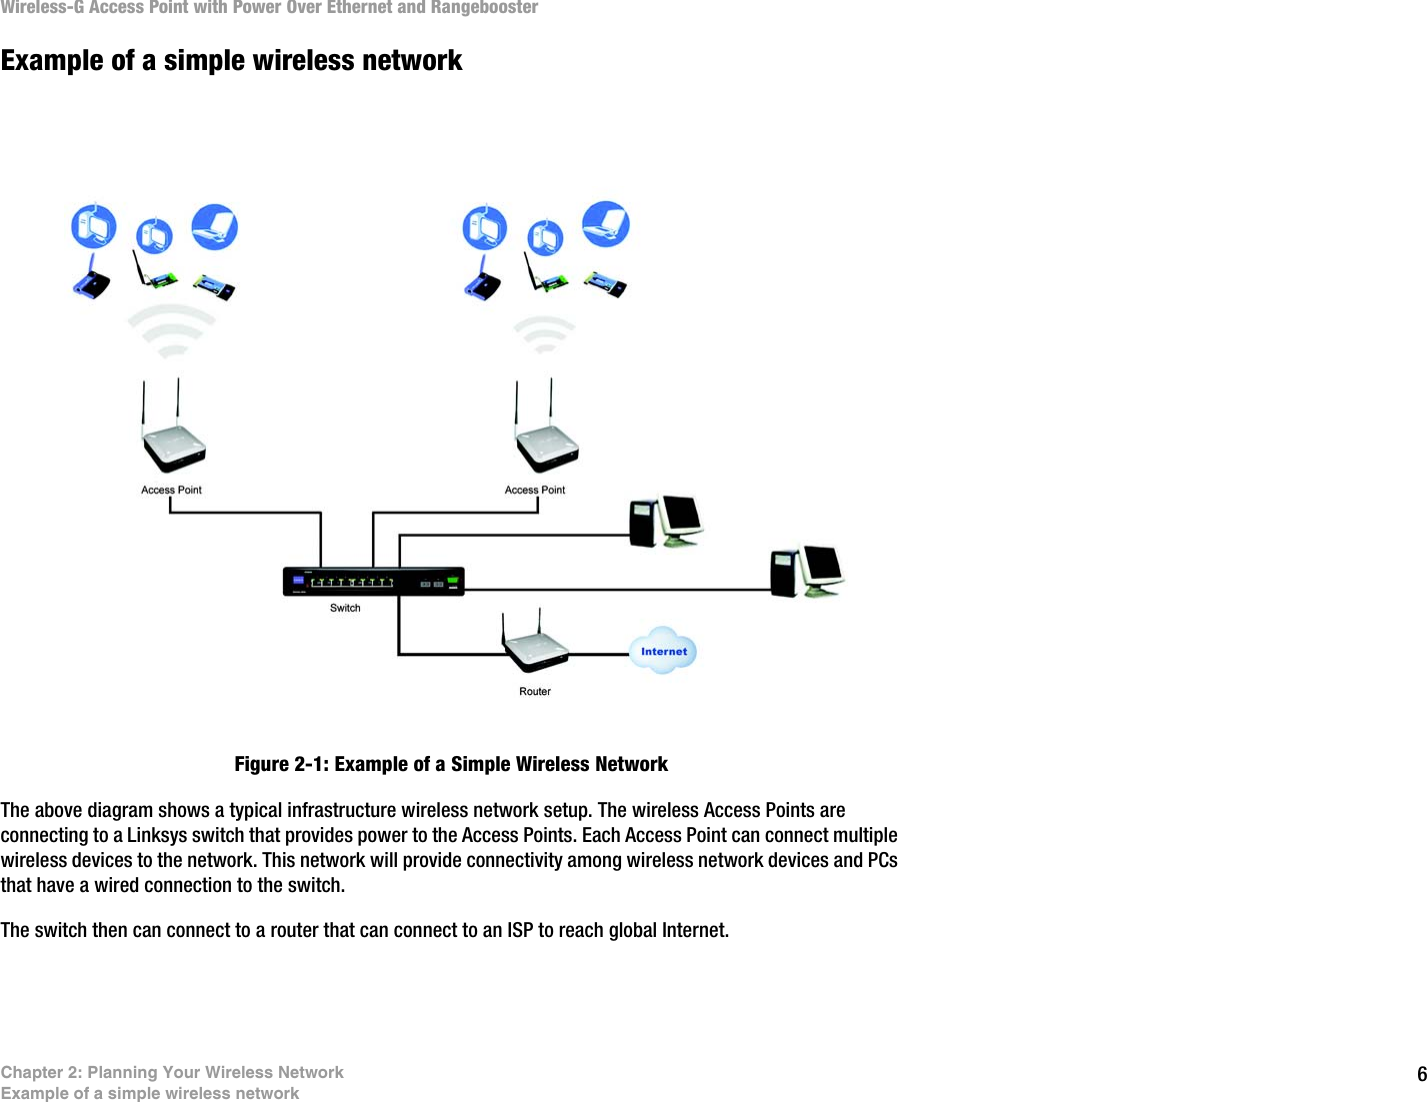 6Chapter 2: Planning Your Wireless NetworkExample of a simple wireless networkWireless-G Access Point with Power Over Ethernet and RangeboosterExample of a simple wireless networkFigure 2-1: Example of a Simple Wireless NetworkThe above diagram shows a typical infrastructure wireless network setup. The wireless Access Points are connecting to a Linksys switch that provides power to the Access Points. Each Access Point can connect multiple wireless devices to the network. This network will provide connectivity among wireless network devices and PCs that have a wired connection to the switch. The switch then can connect to a router that can connect to an ISP to reach global Internet.